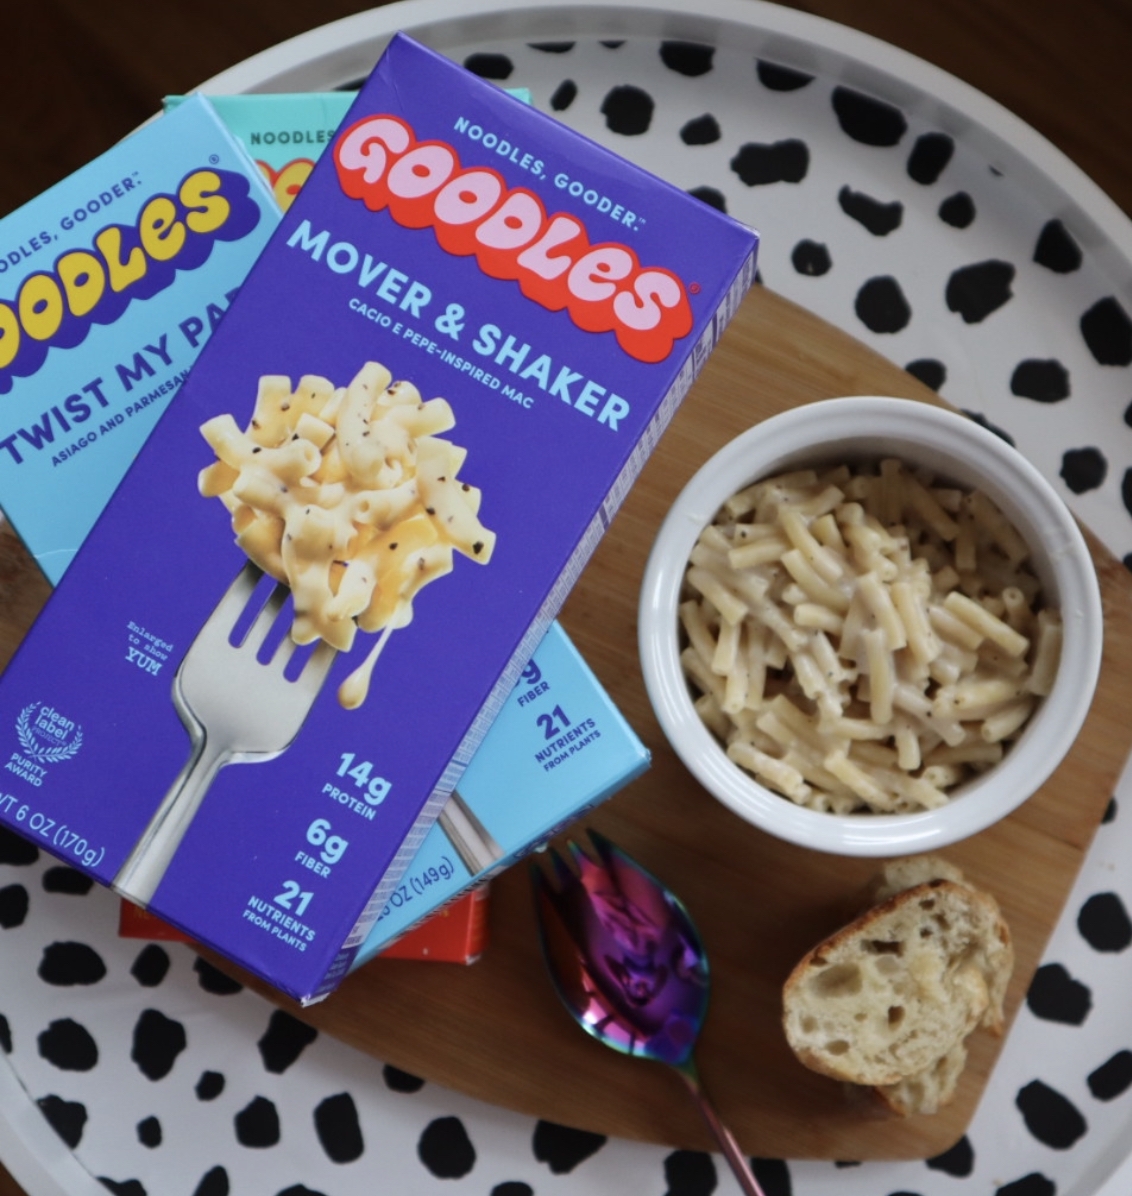 GOODLES, Good For You Mac & Cheese